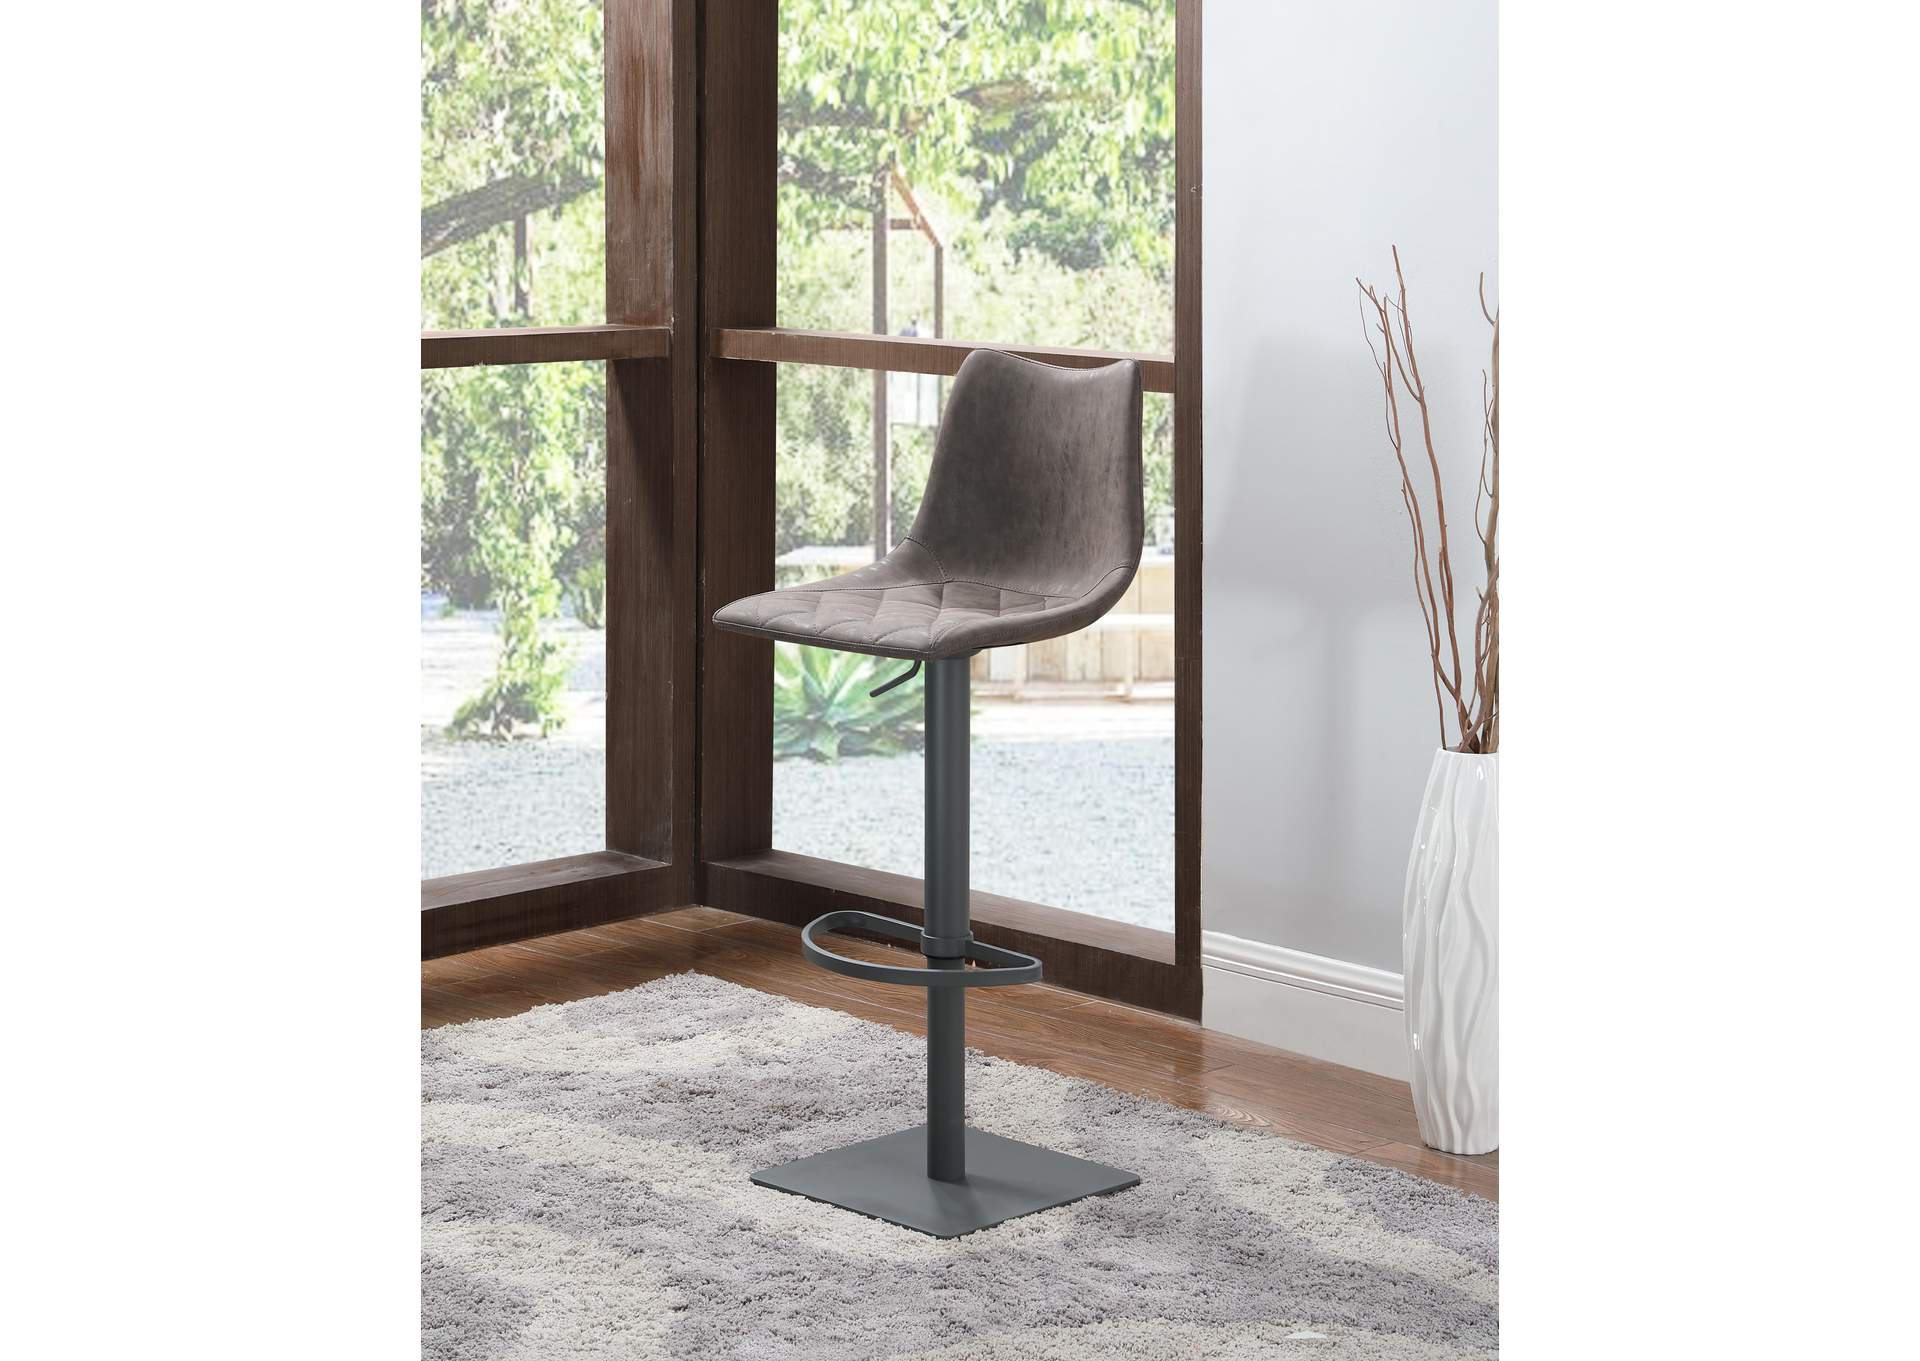 Curved Back Pneumatic-Adjustable Stool w/ Diamond Stitched Seat,Chintaly Imports